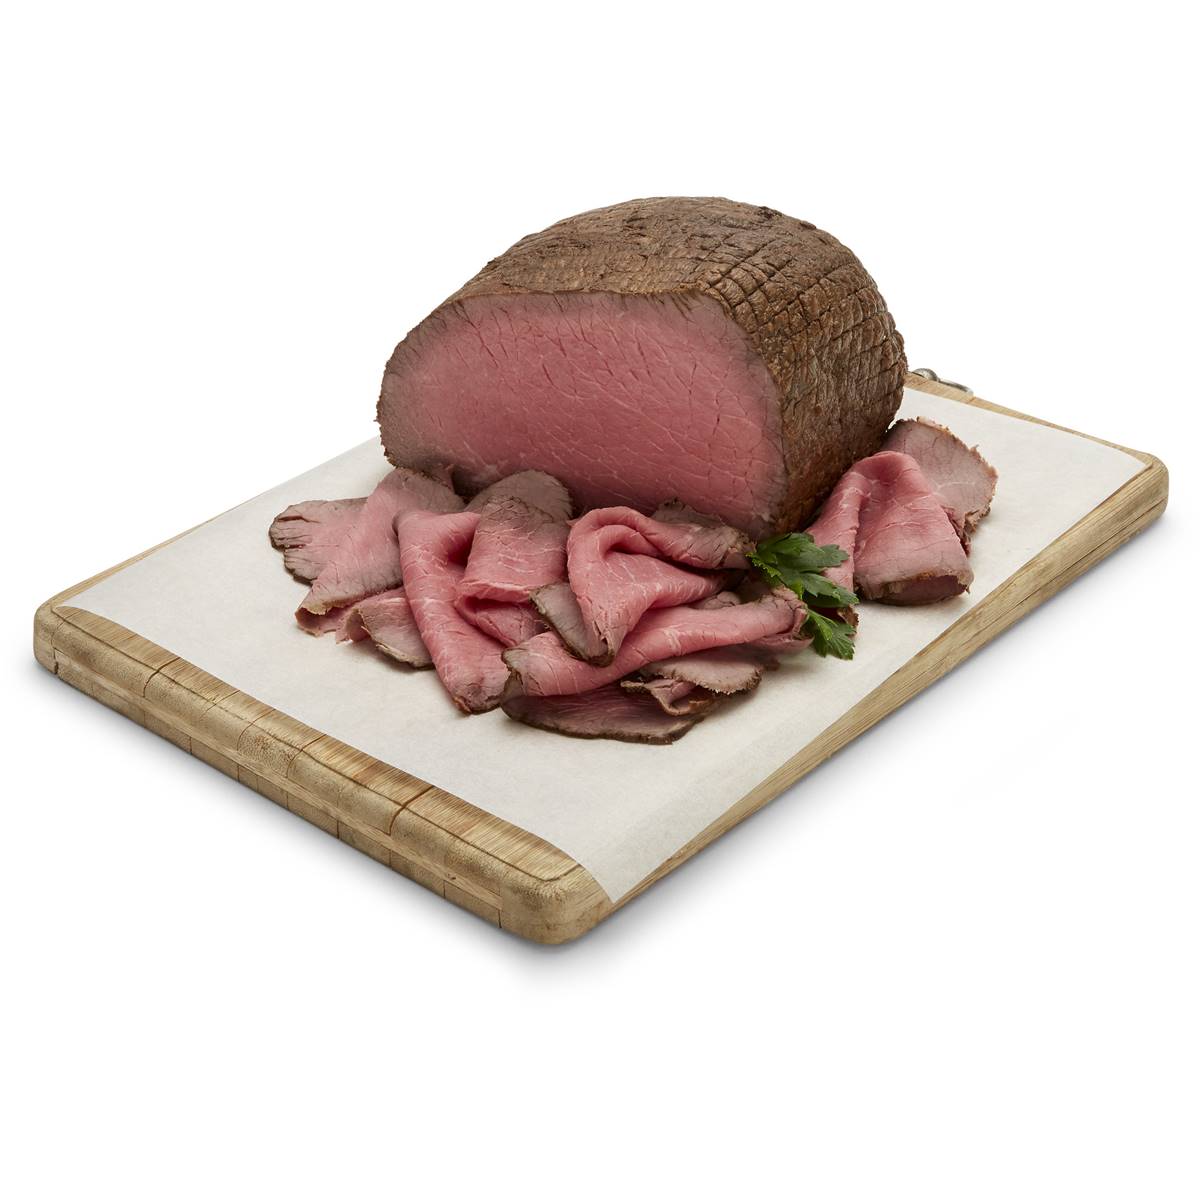 Calories in Woolworths Australian Rare Roast Beef Sliced From The Deli